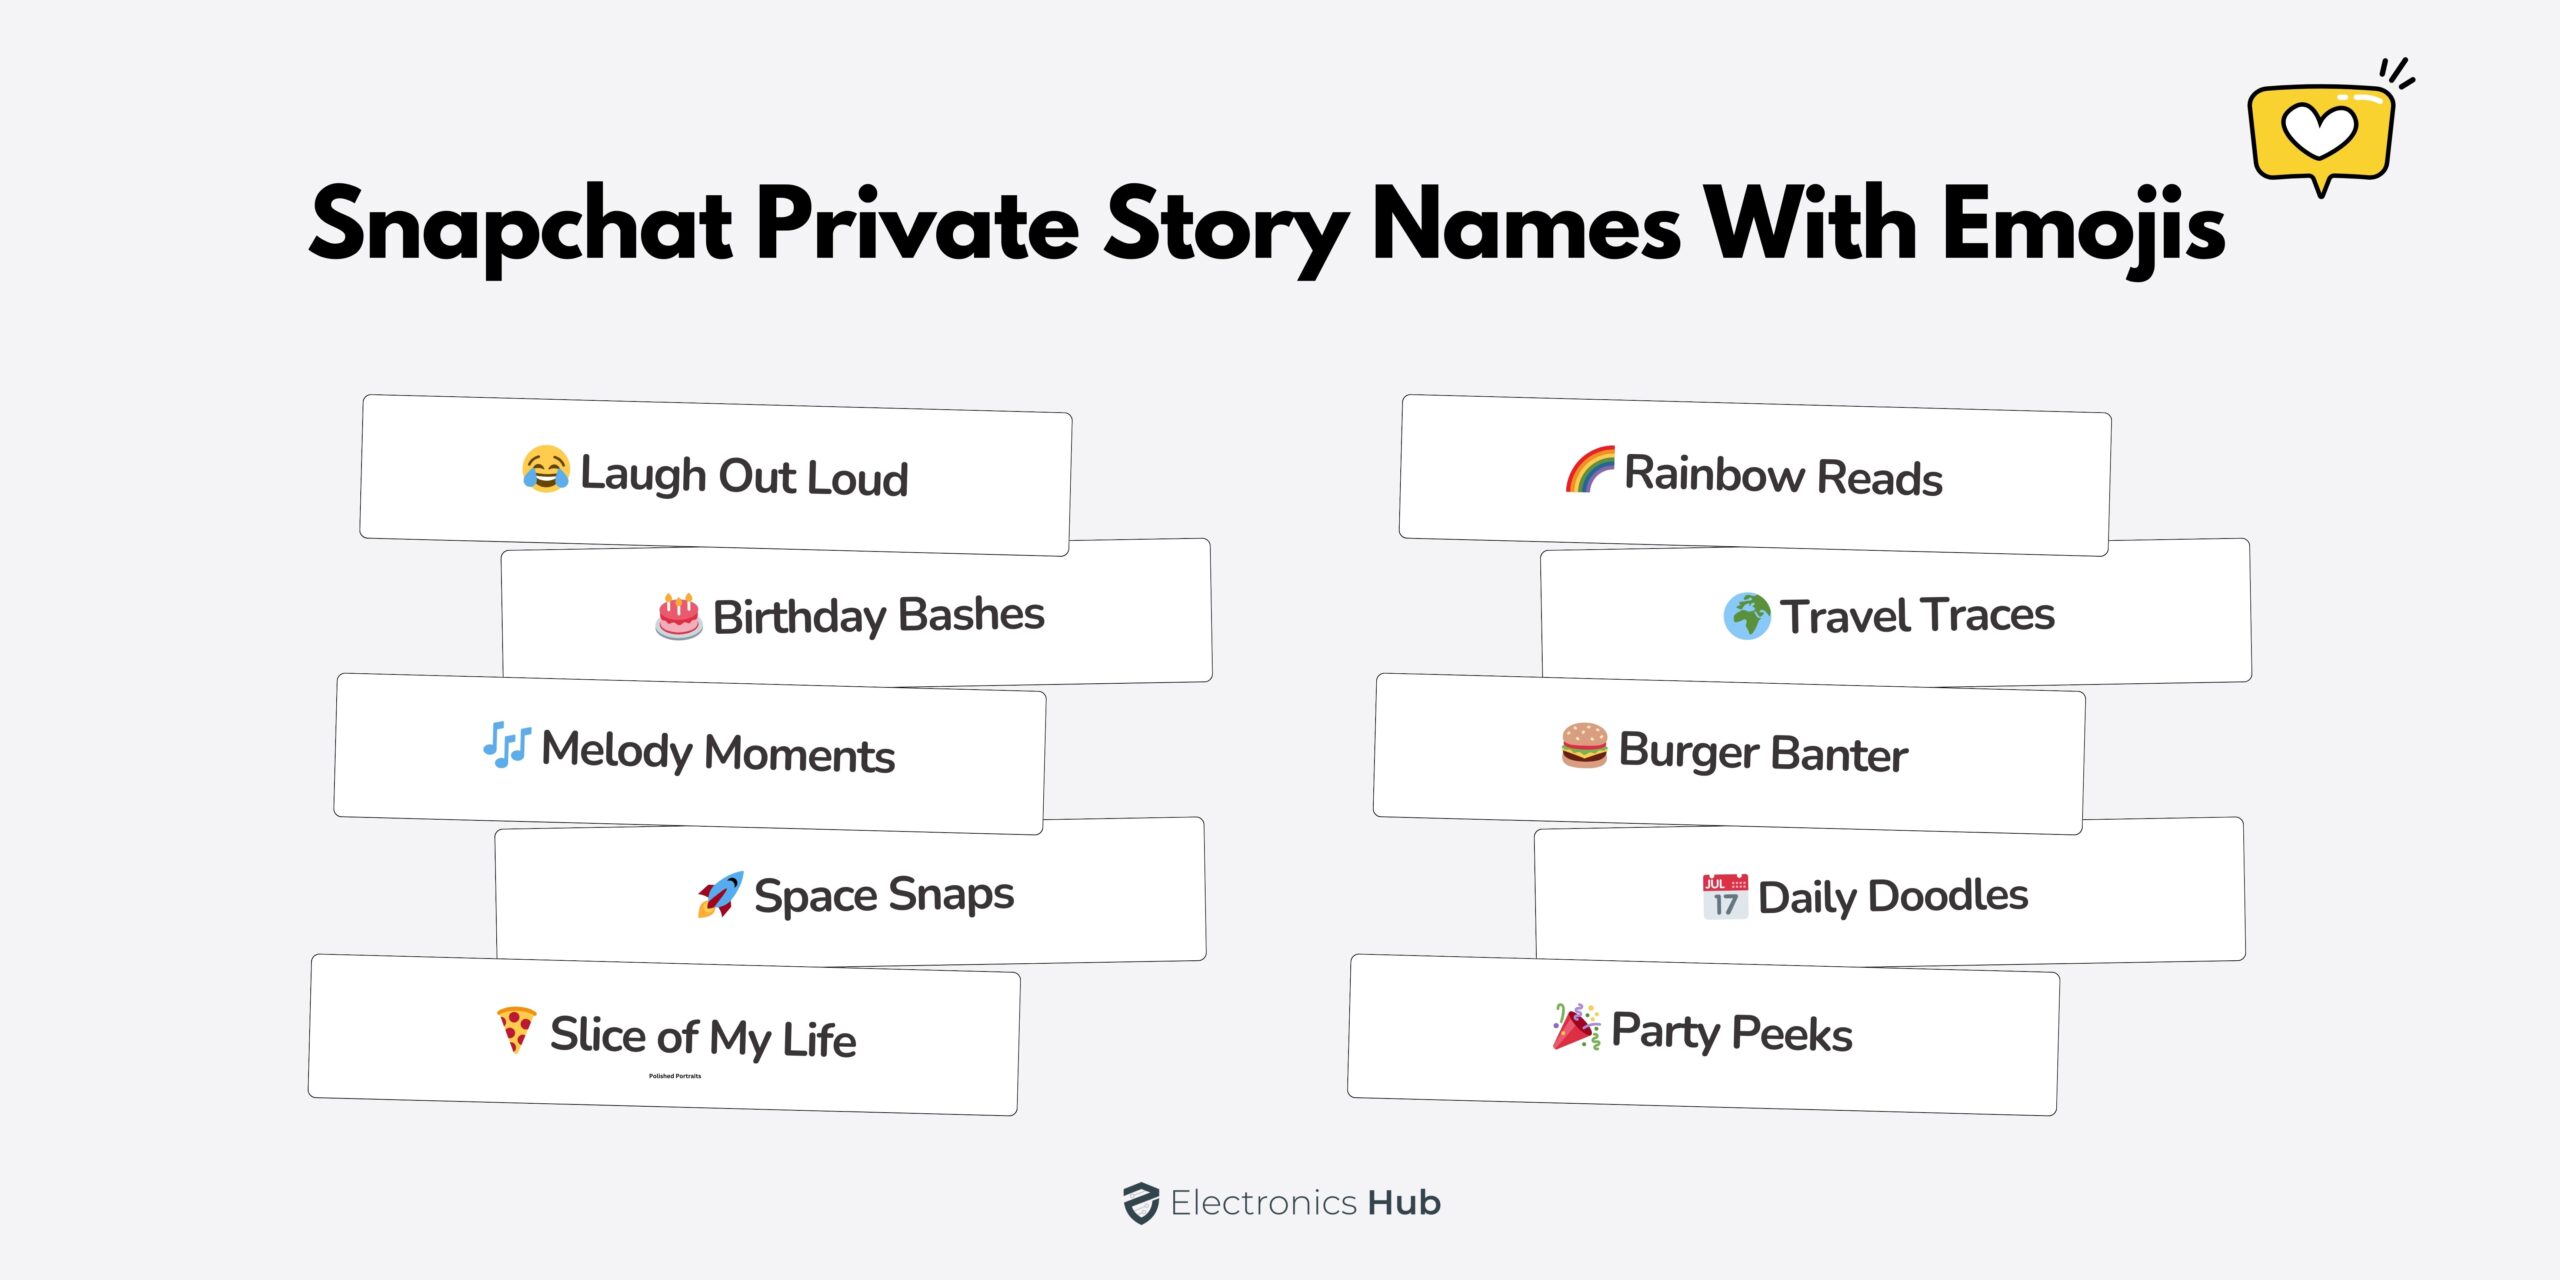 Snapchat Private Story Names with Emojis